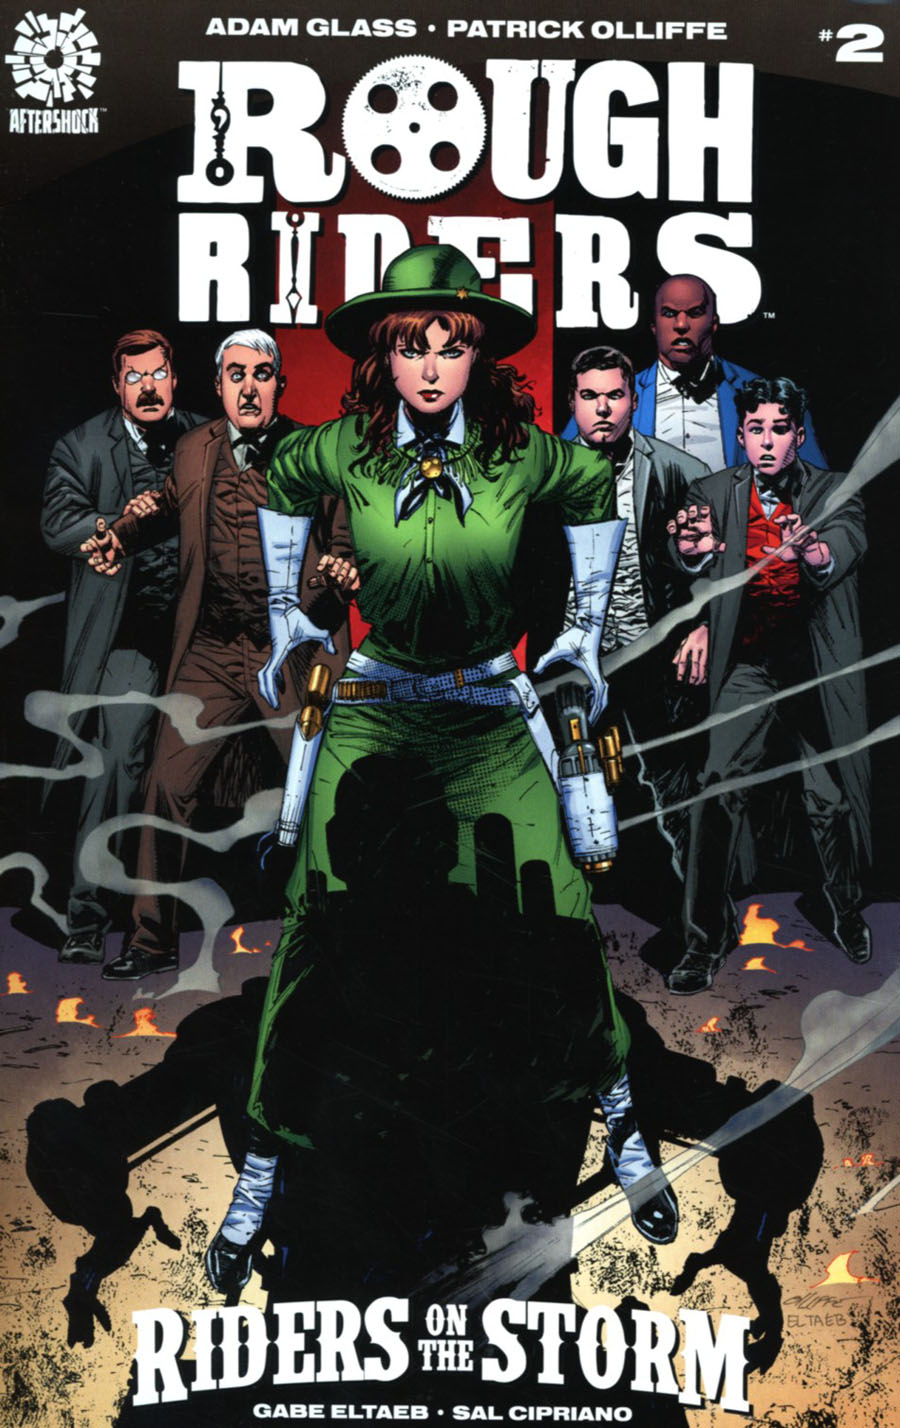 Rough Riders Riders On The Storm #2